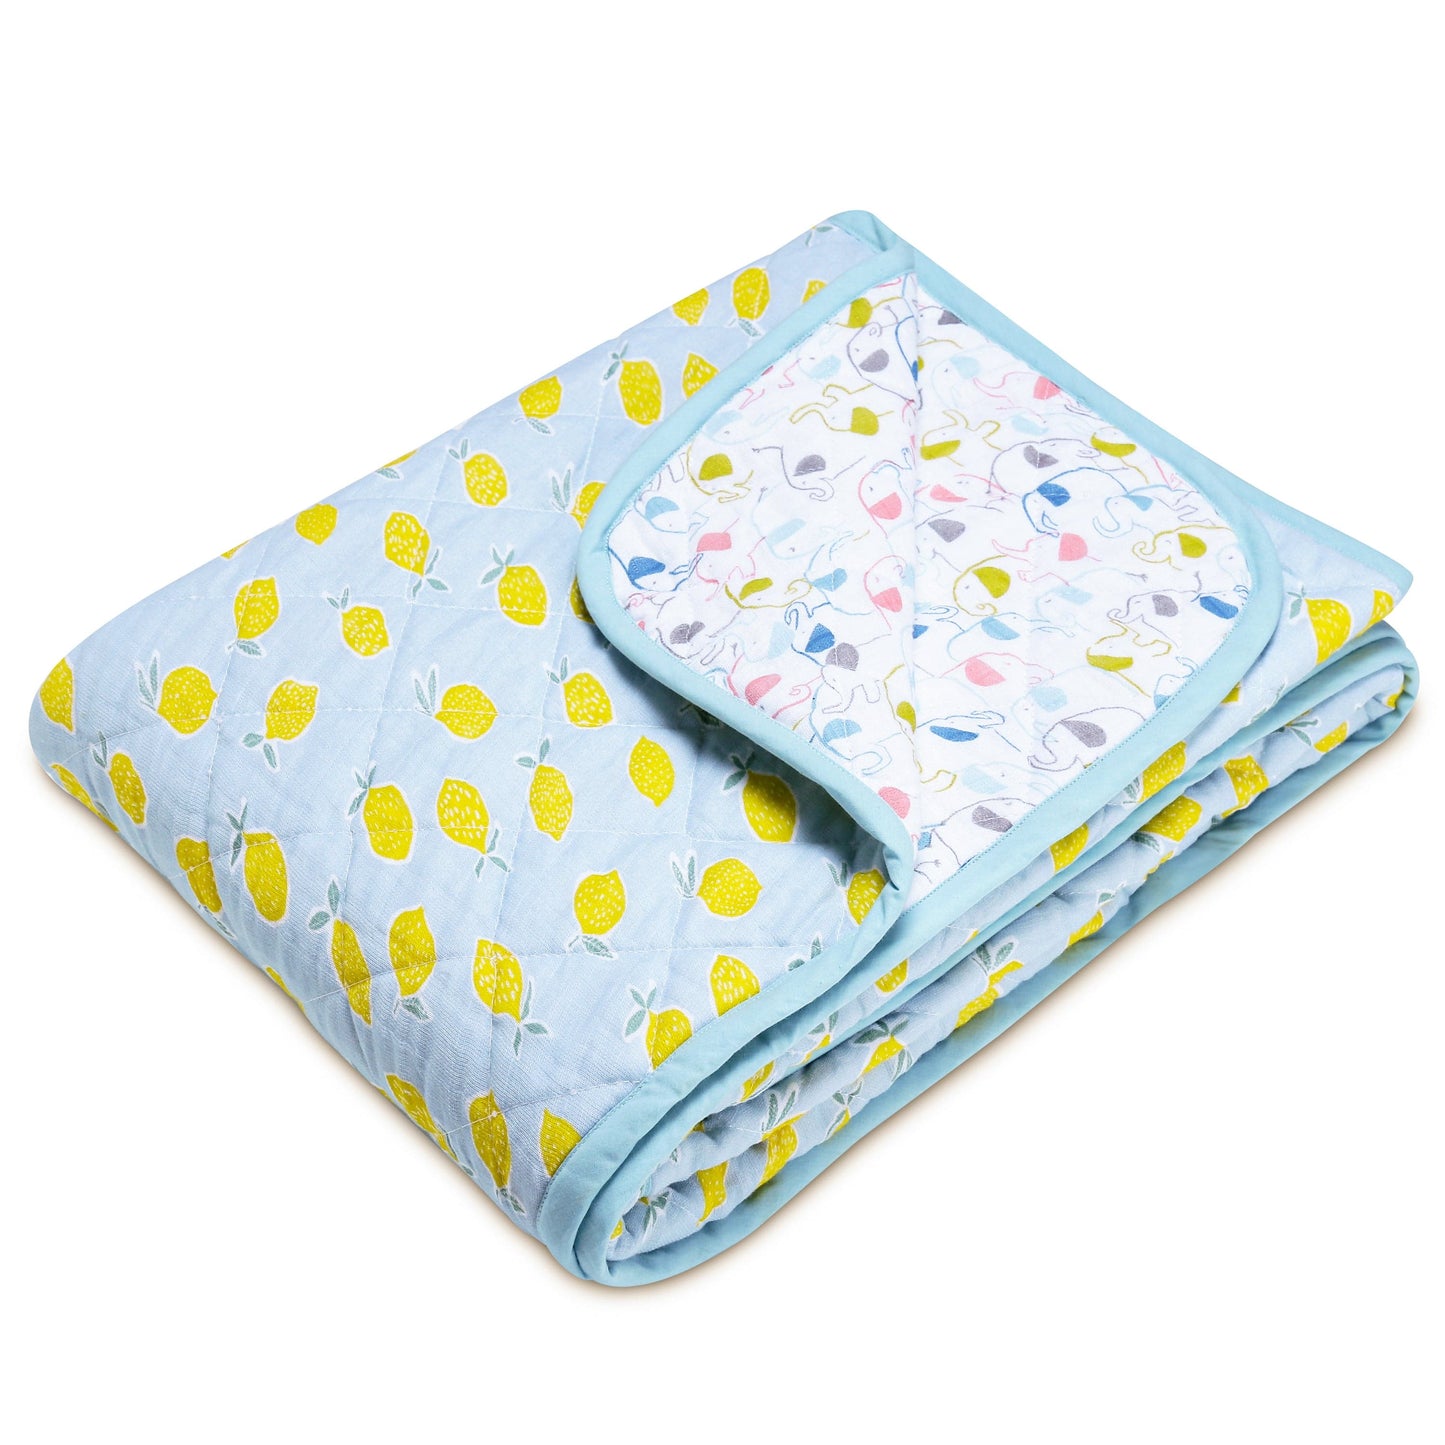 Fruit & brute 100% Cotton Muslin Reversible Quilt for New Born Baby